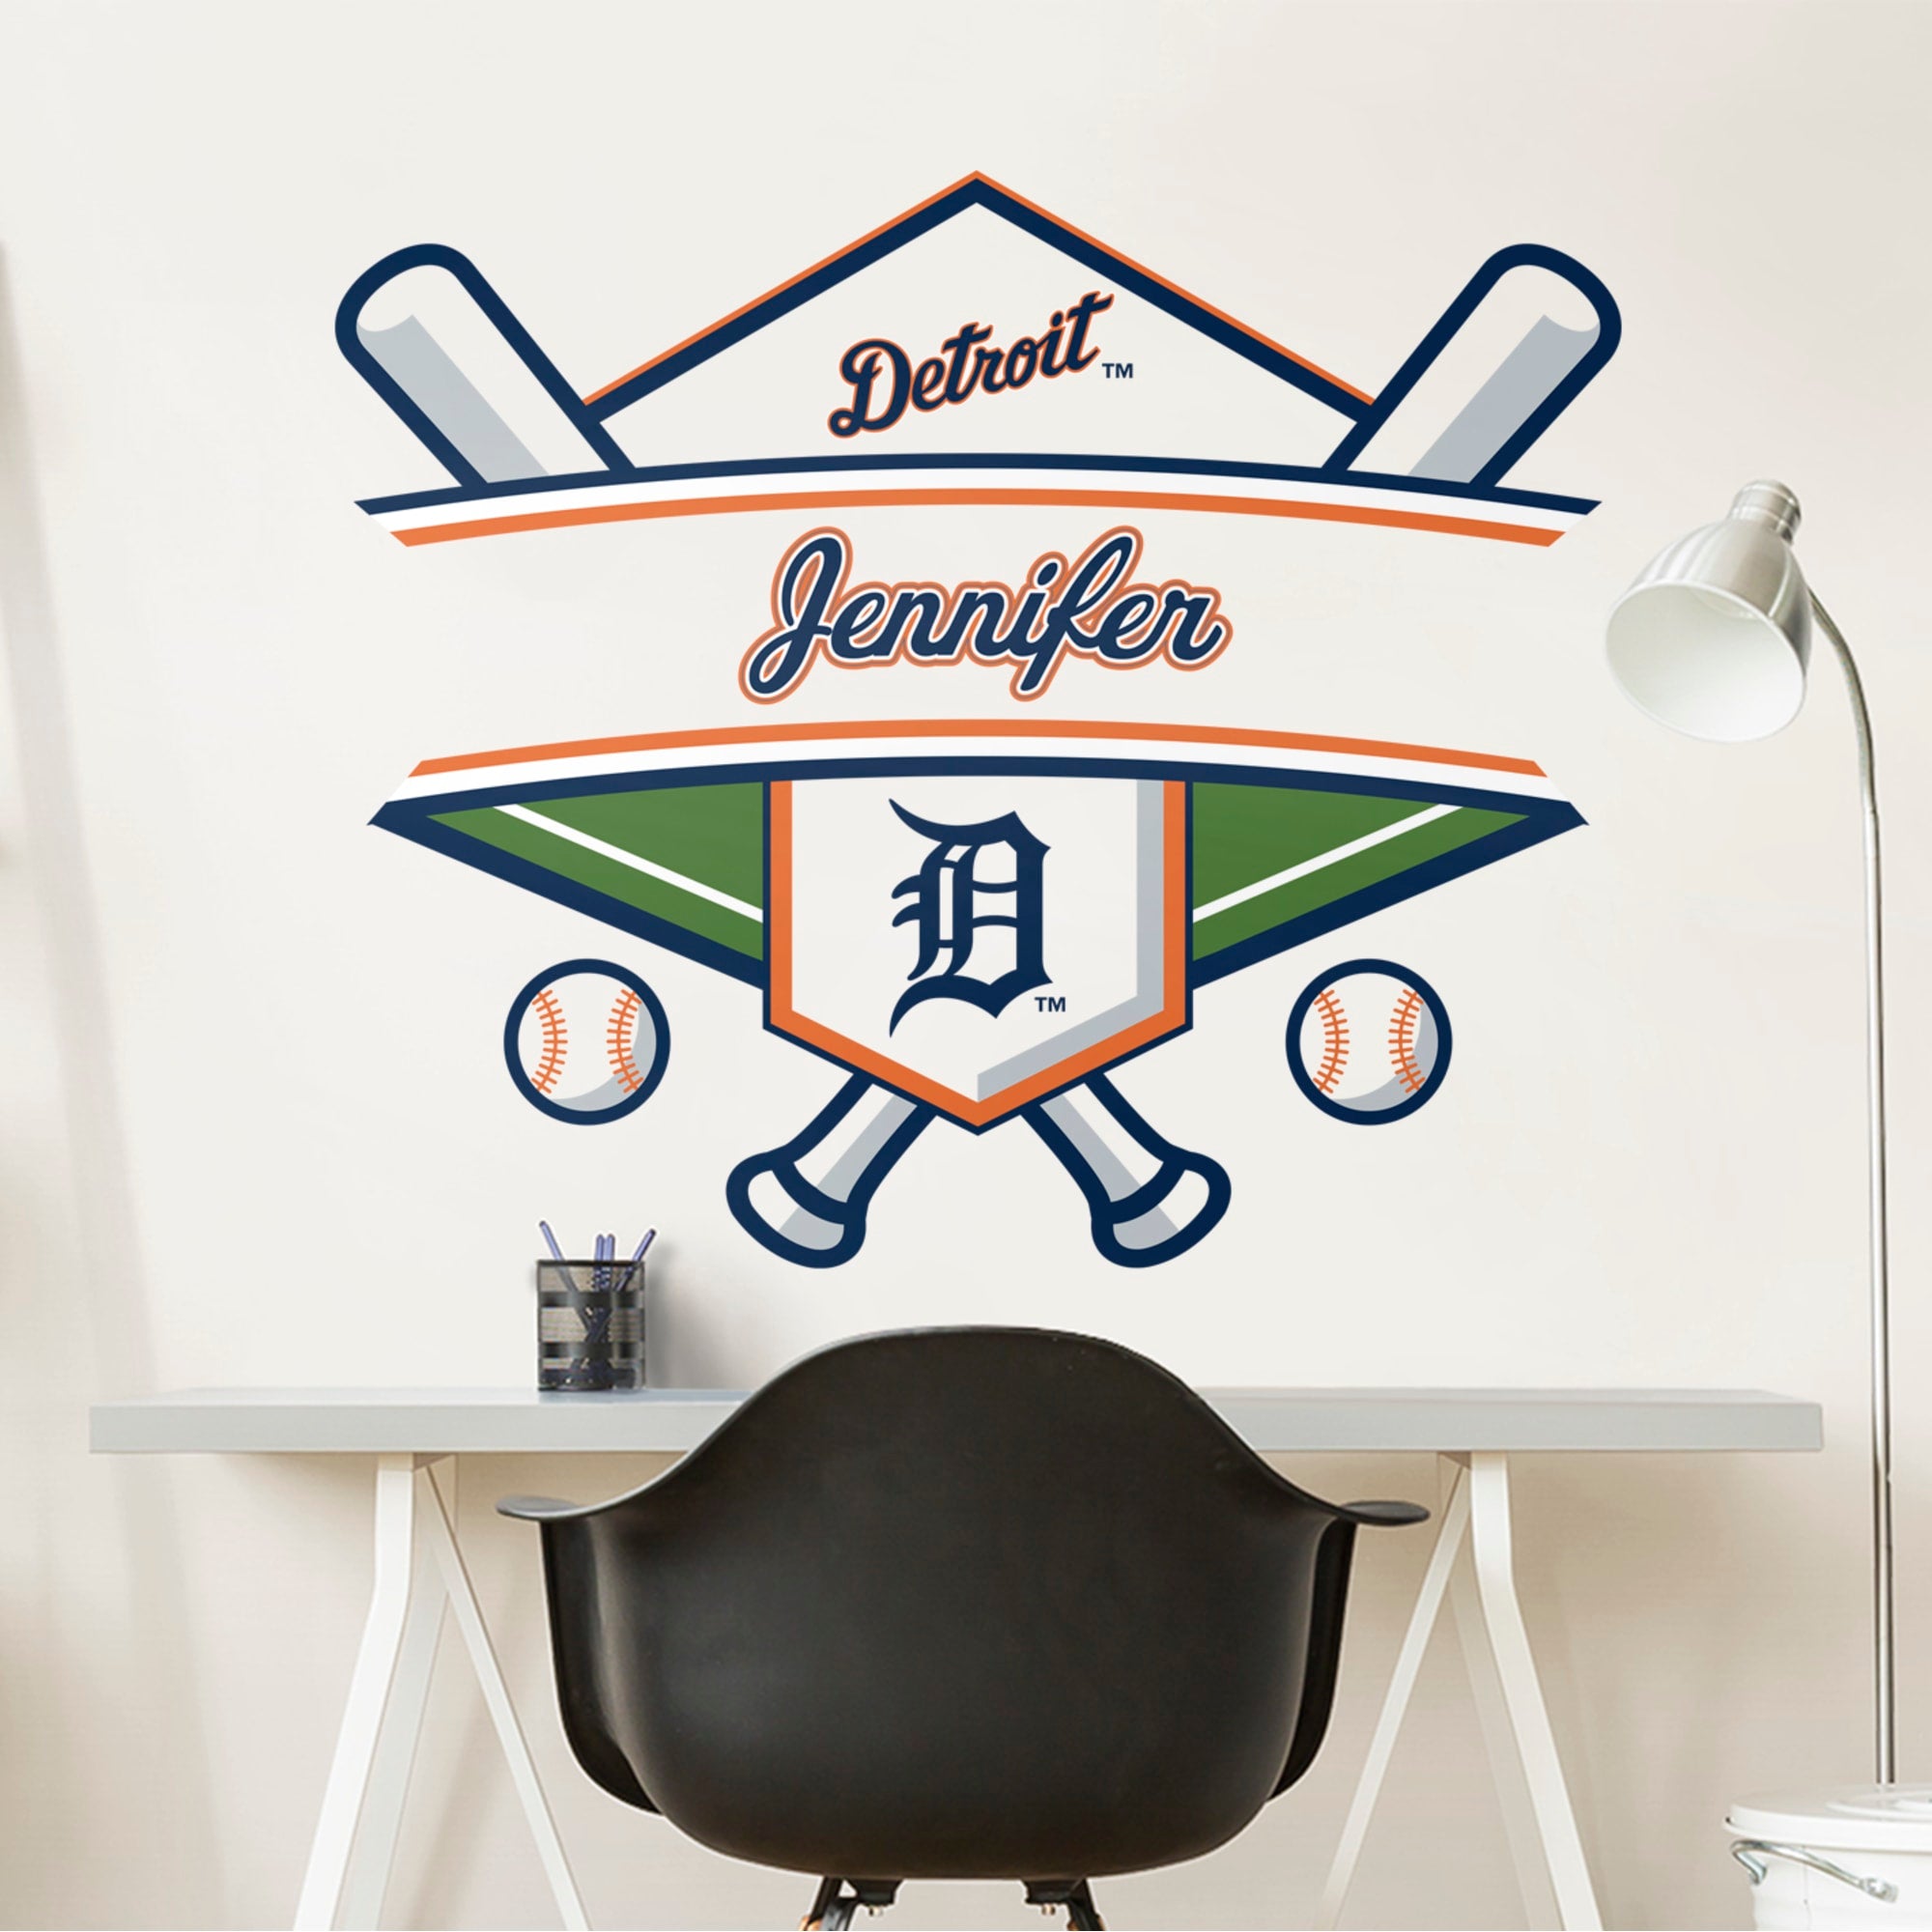 Detroit Tigers: Personalized Name - Officially Licensed MLB Transfer Decal 52"W x 39.5"H by Fathead | Vinyl